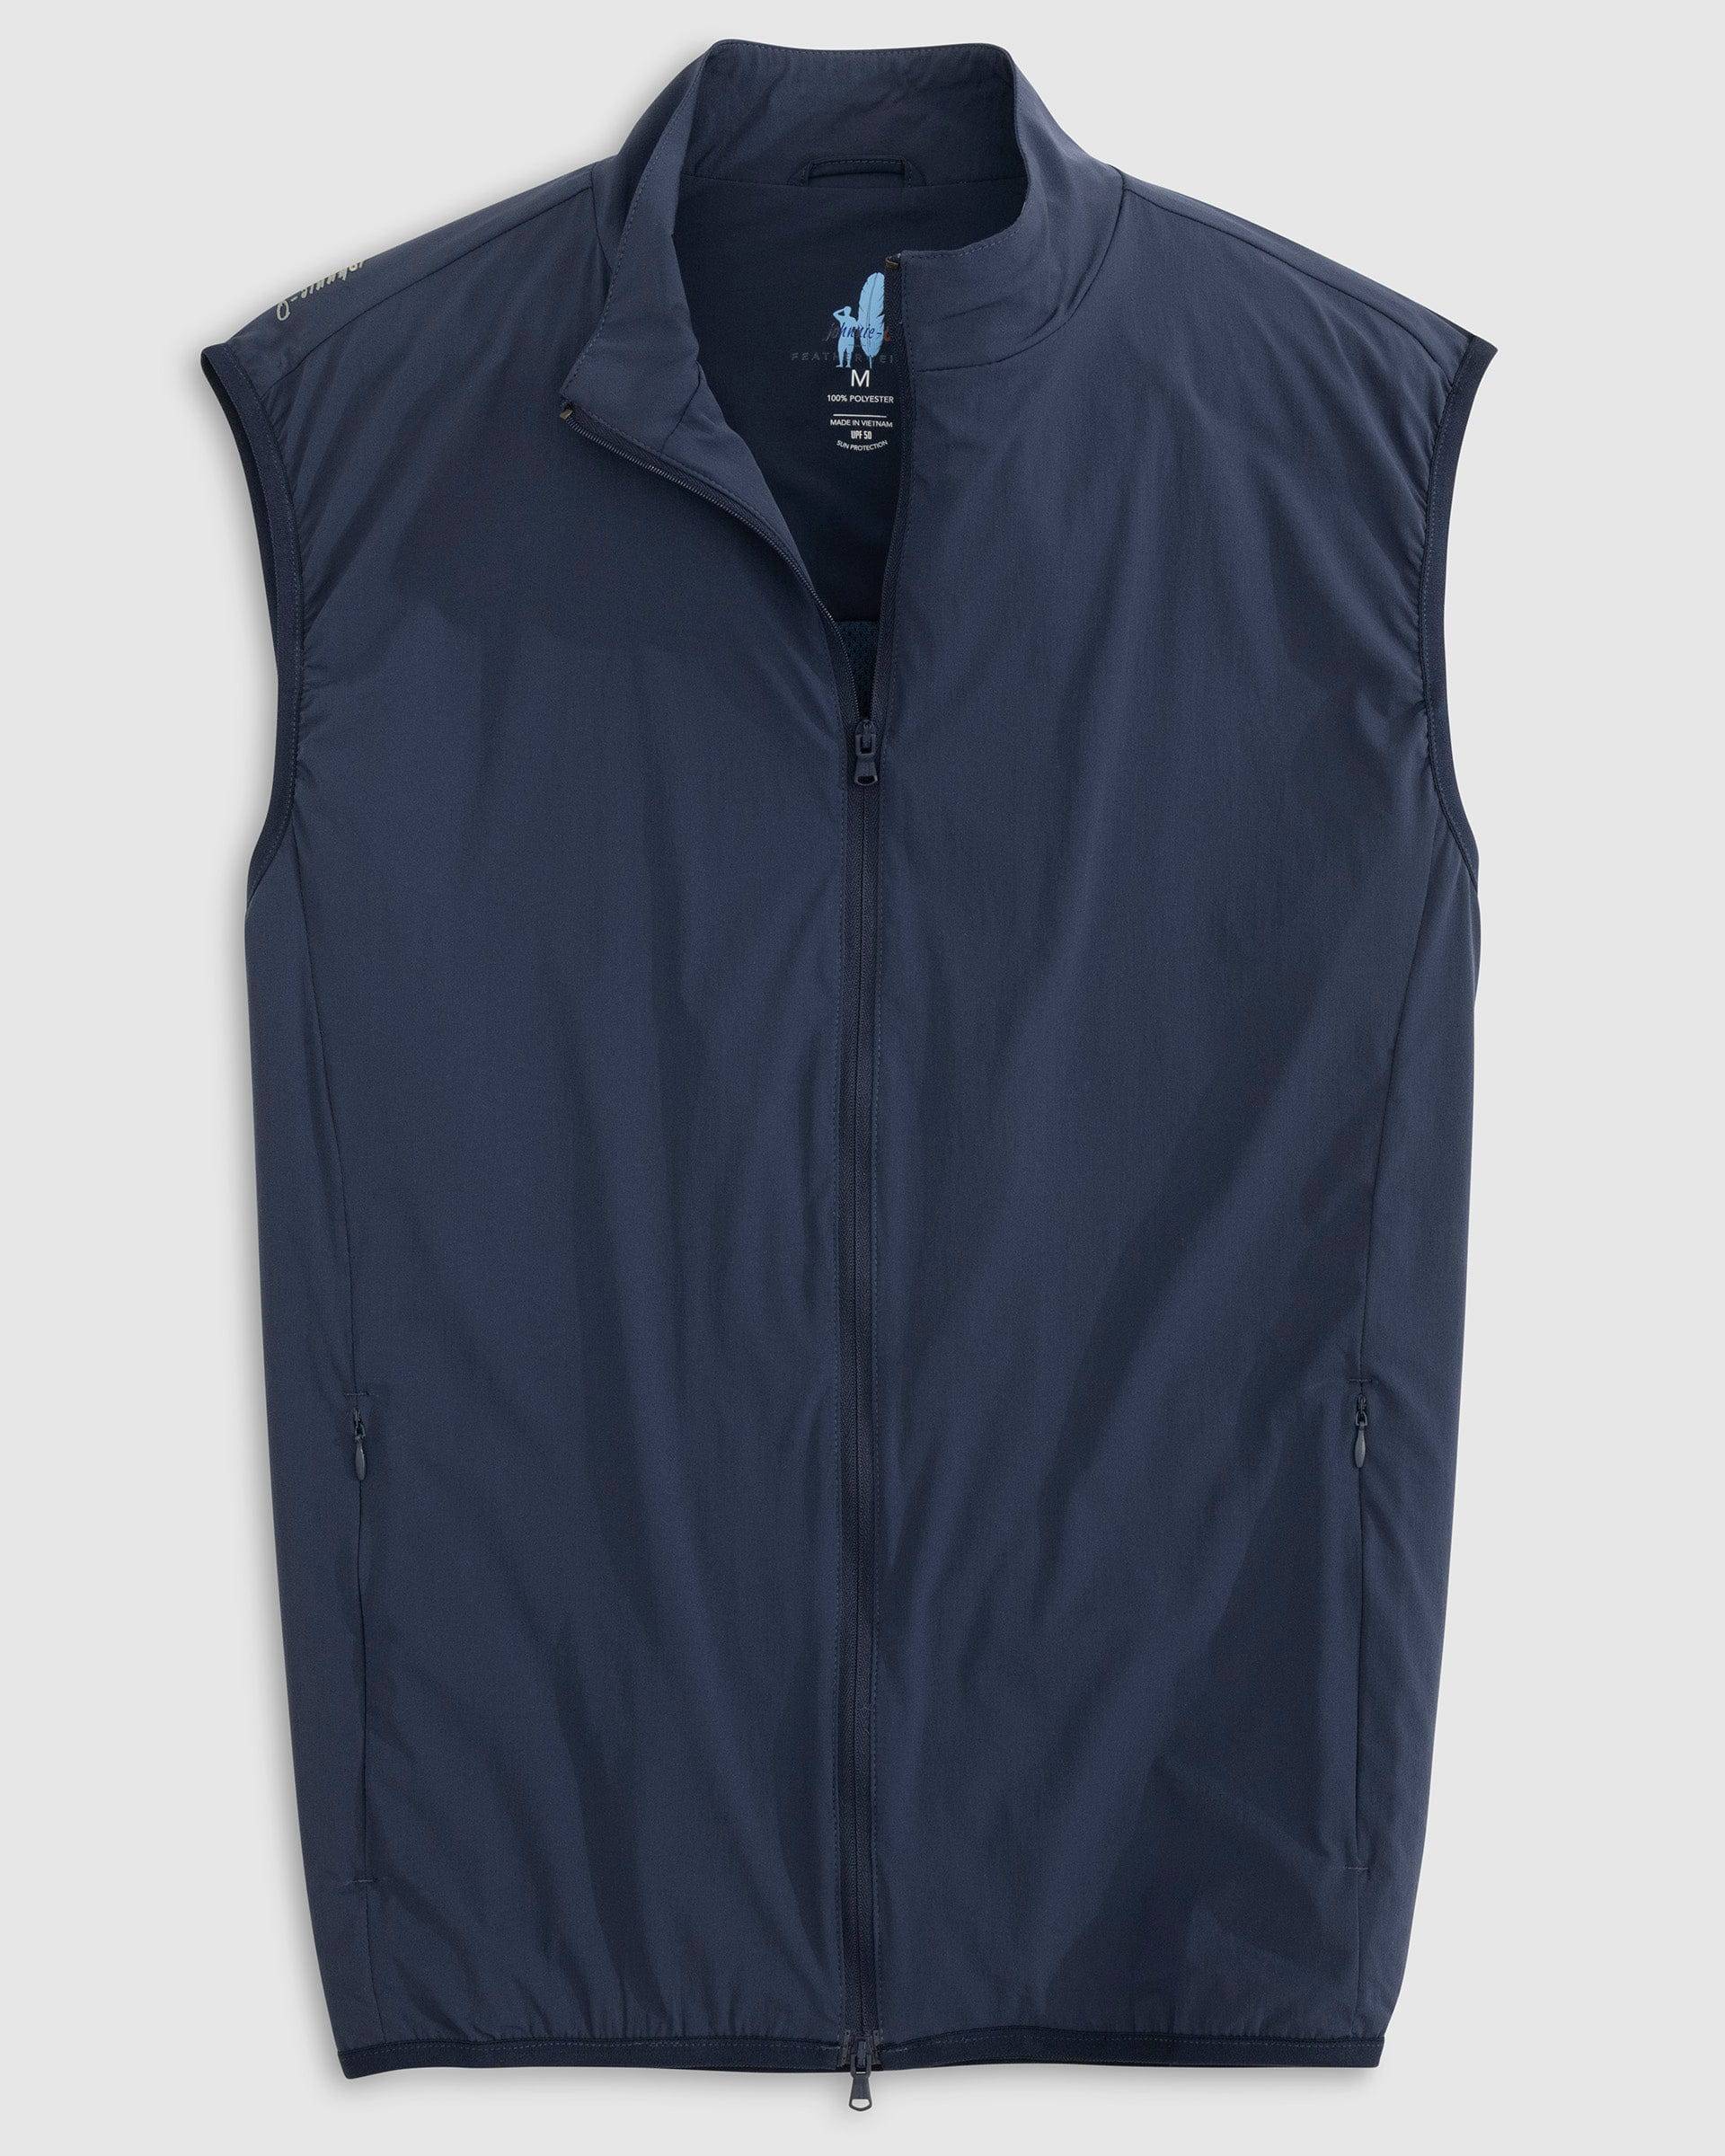 Johnnie-O Axis Water Resistant Vest